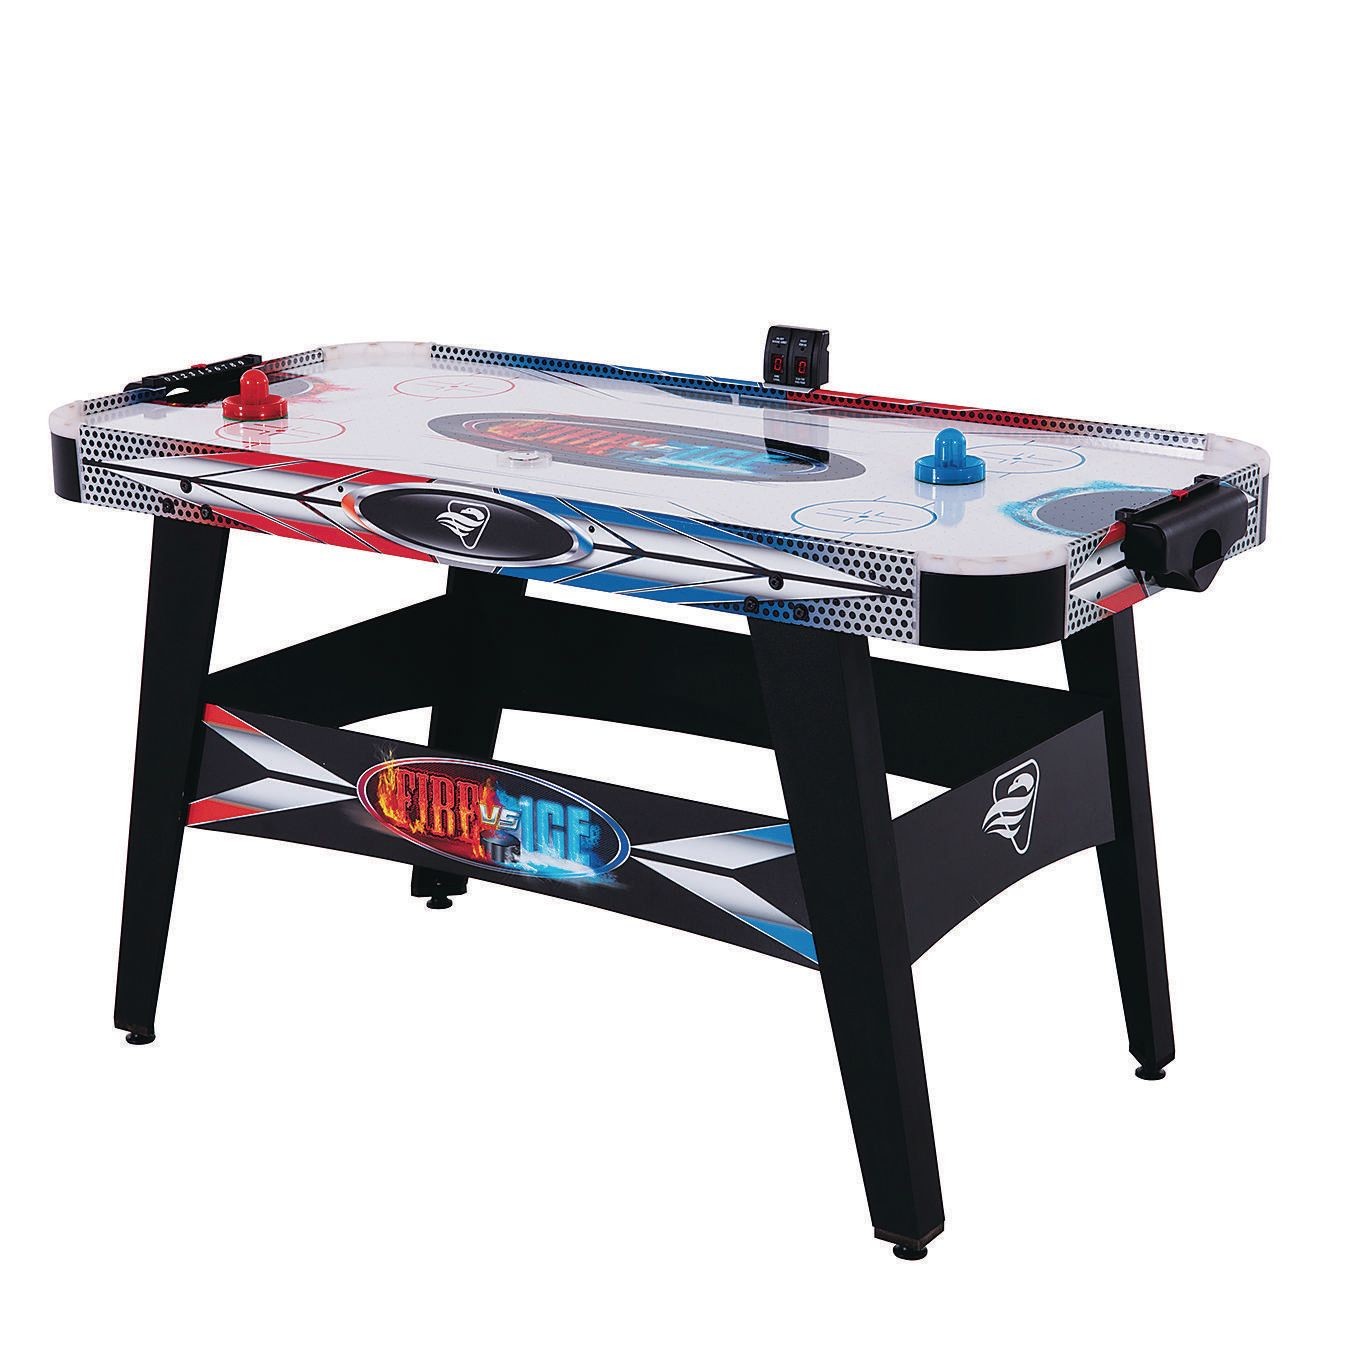 Triumph Fire 'n Ice air hockey table on white background